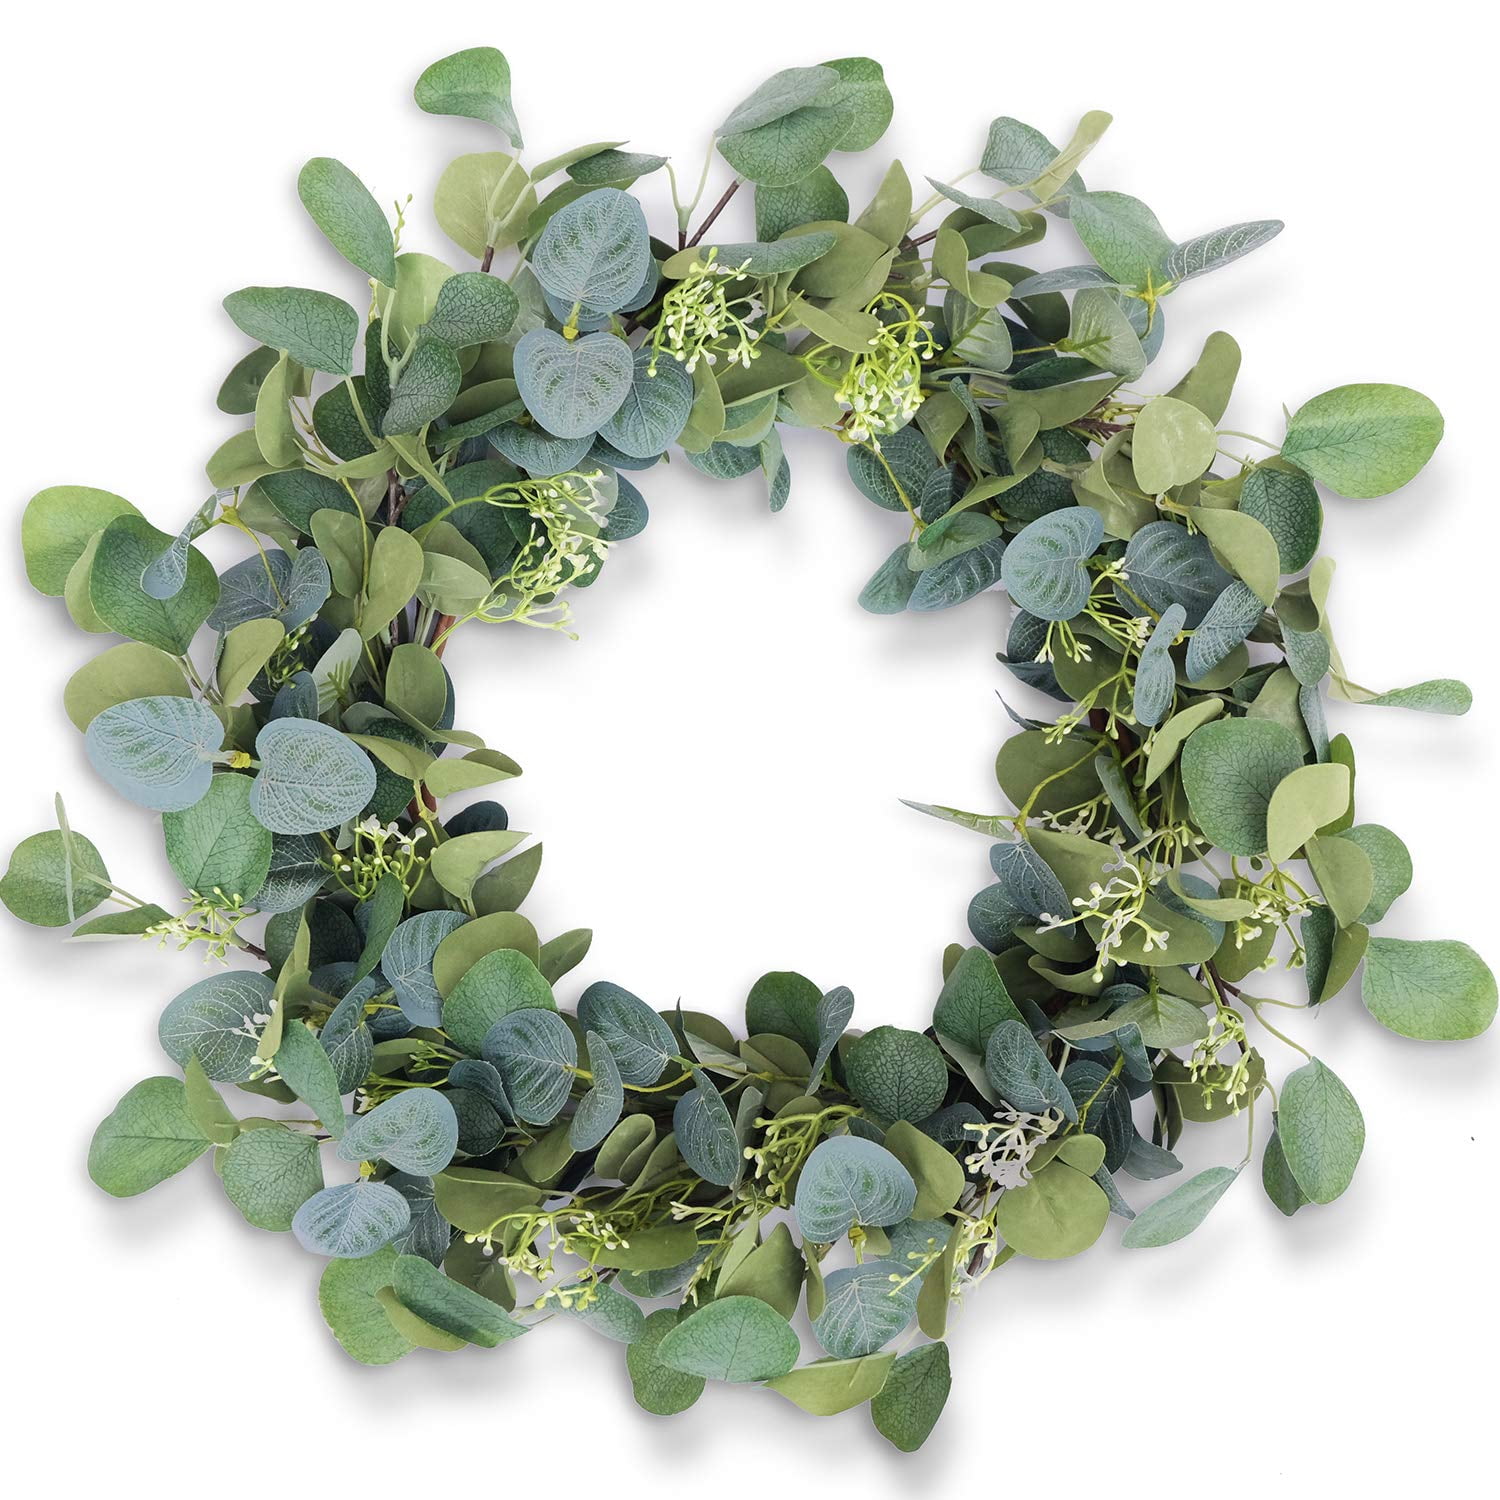 20 Inches Artificial Festival Celebration Wreath for Front Door Year Round LIFEFAIR Green Eucalyptus Leaf Wreath